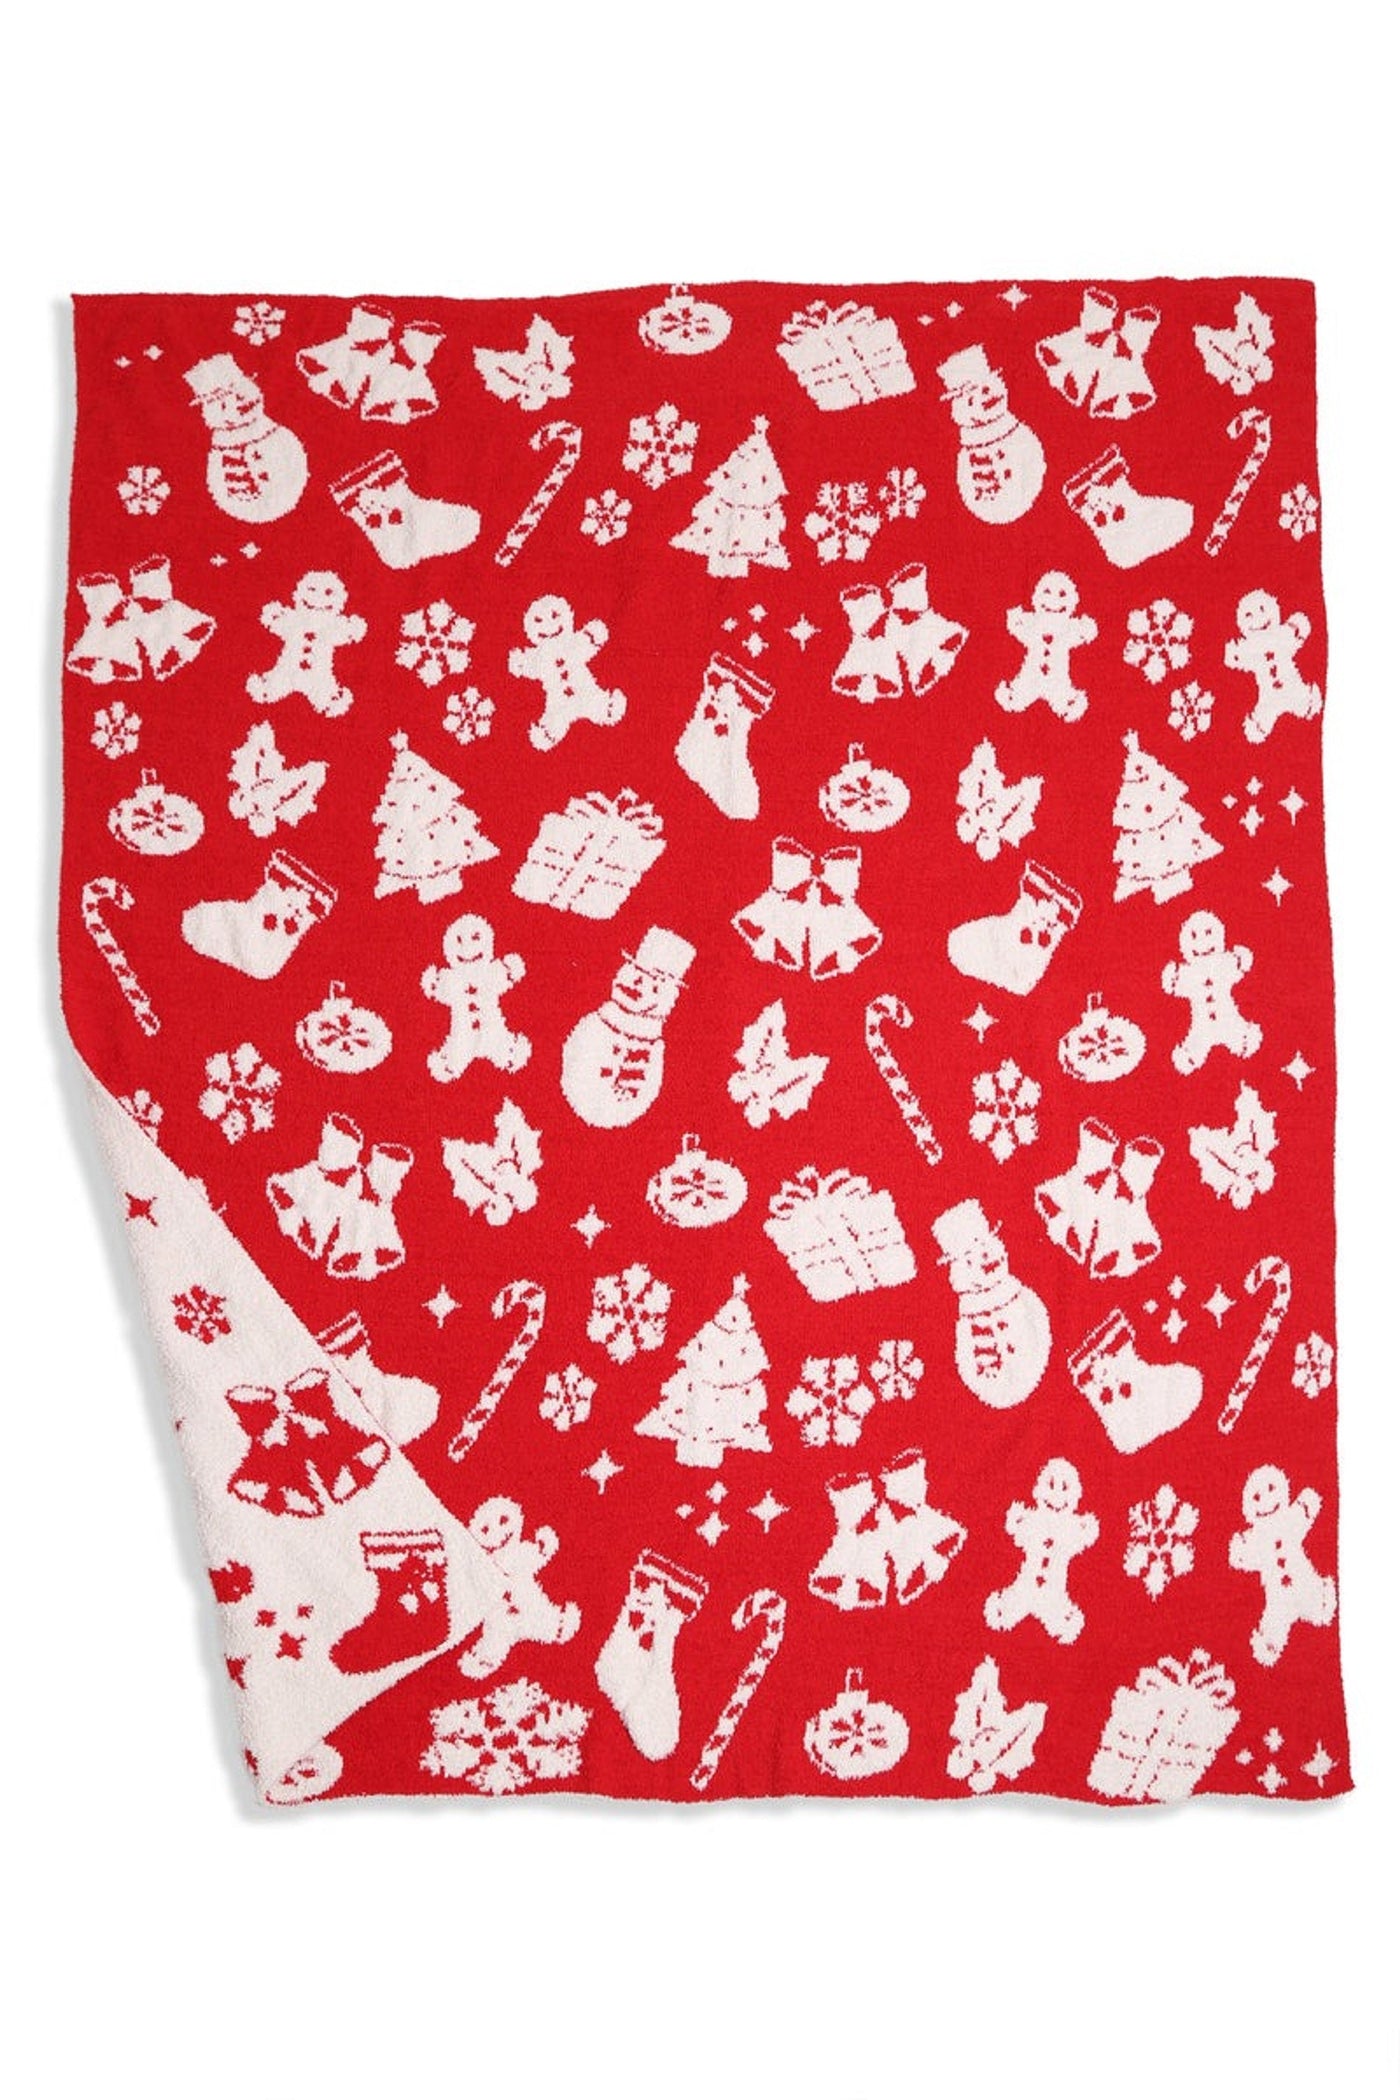 JCL4324-02 Super Lux Festive Holiday Throw Blanket